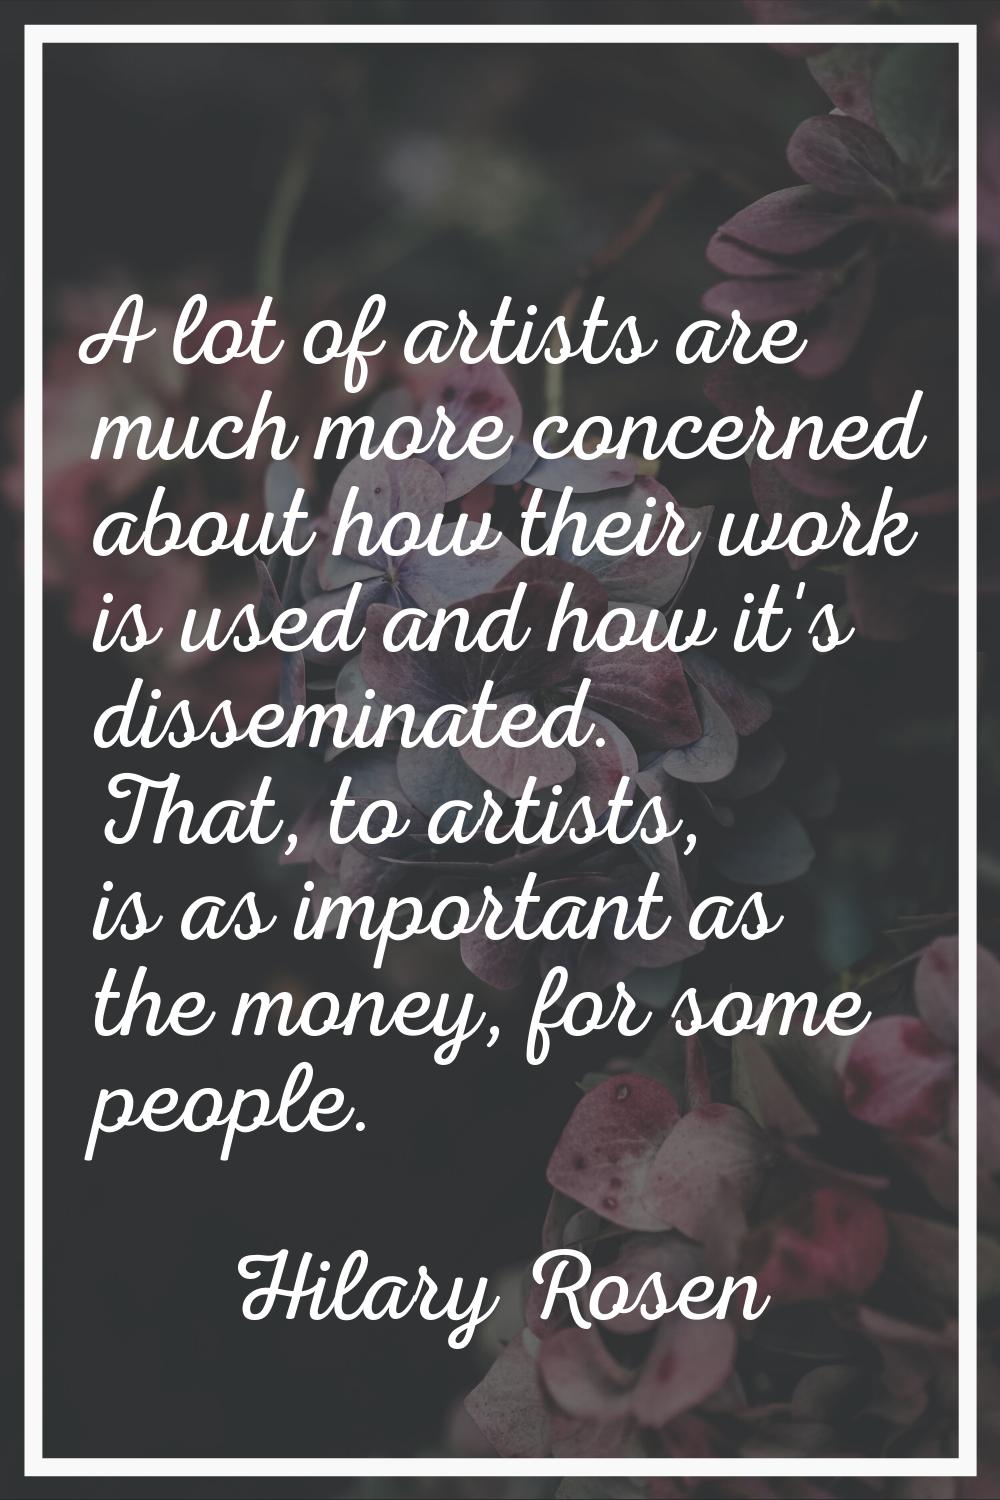 A lot of artists are much more concerned about how their work is used and how it's disseminated. Th